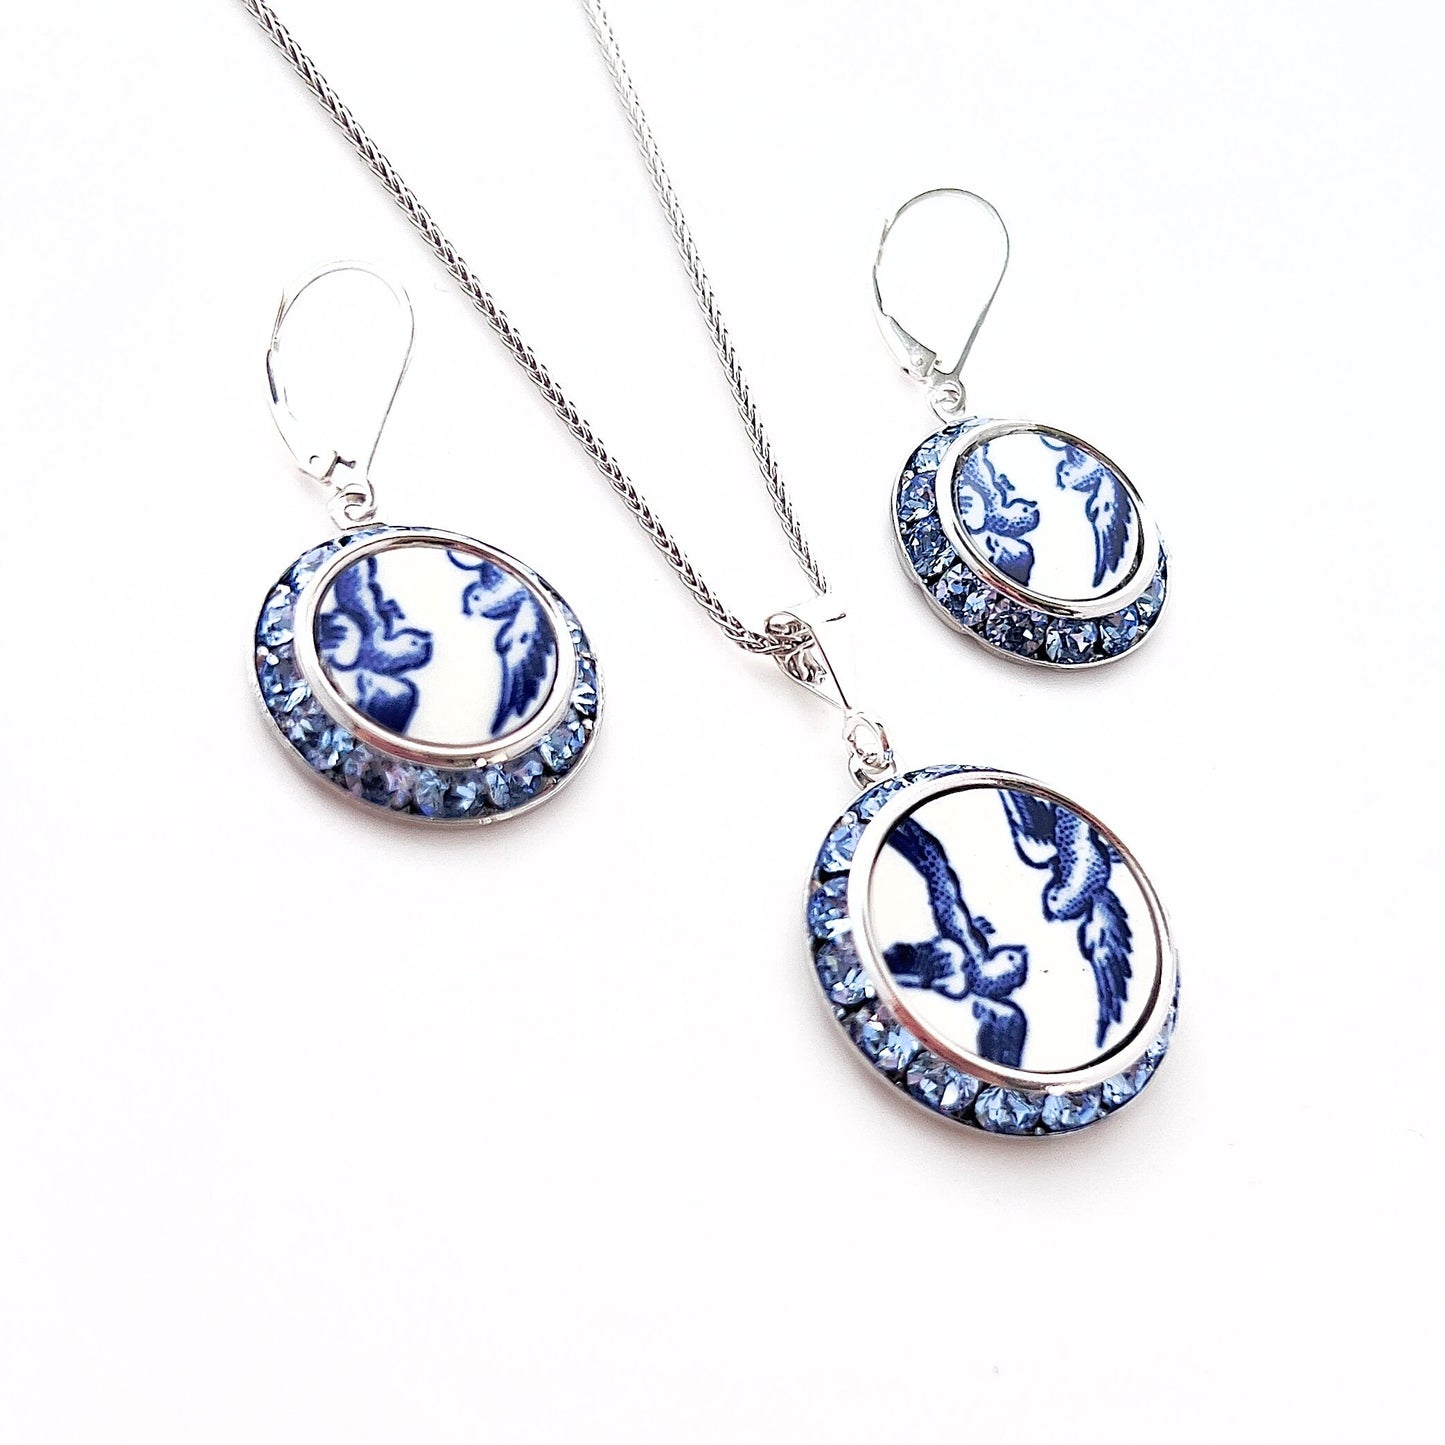 Love Birds Broken China Jewelry Set, Romantic 20th Anniversary Gift for Wife, Vintage Blue Willow Ware China